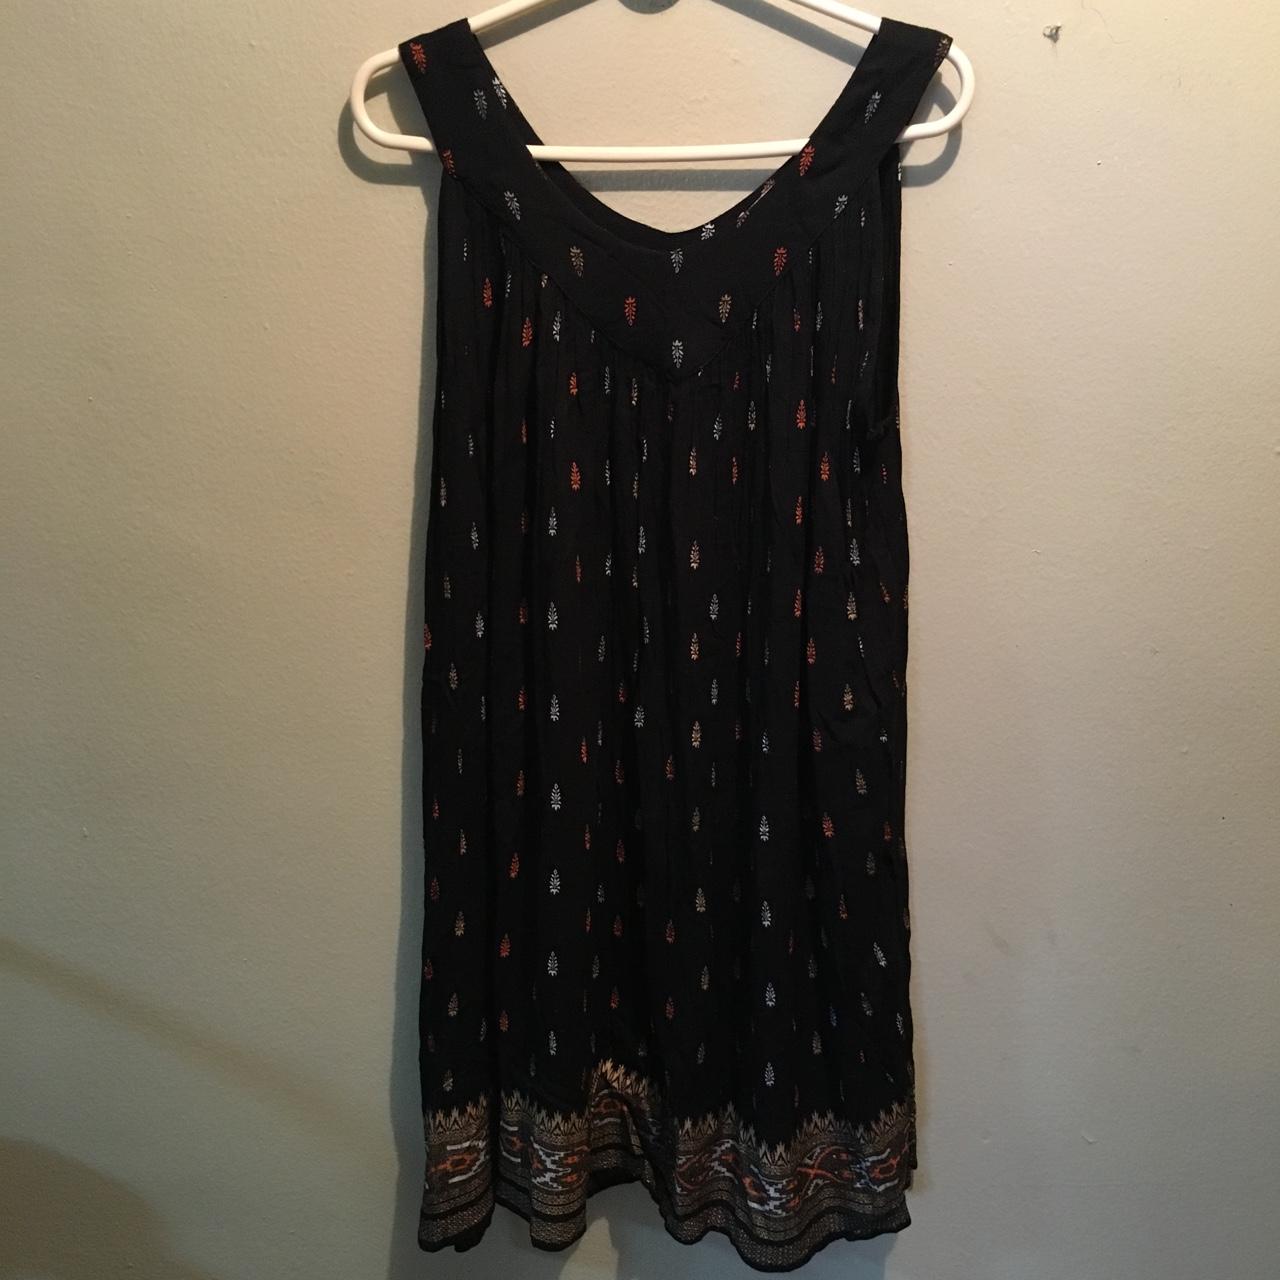 Belma dress with all over leaf print. Great... - Depop